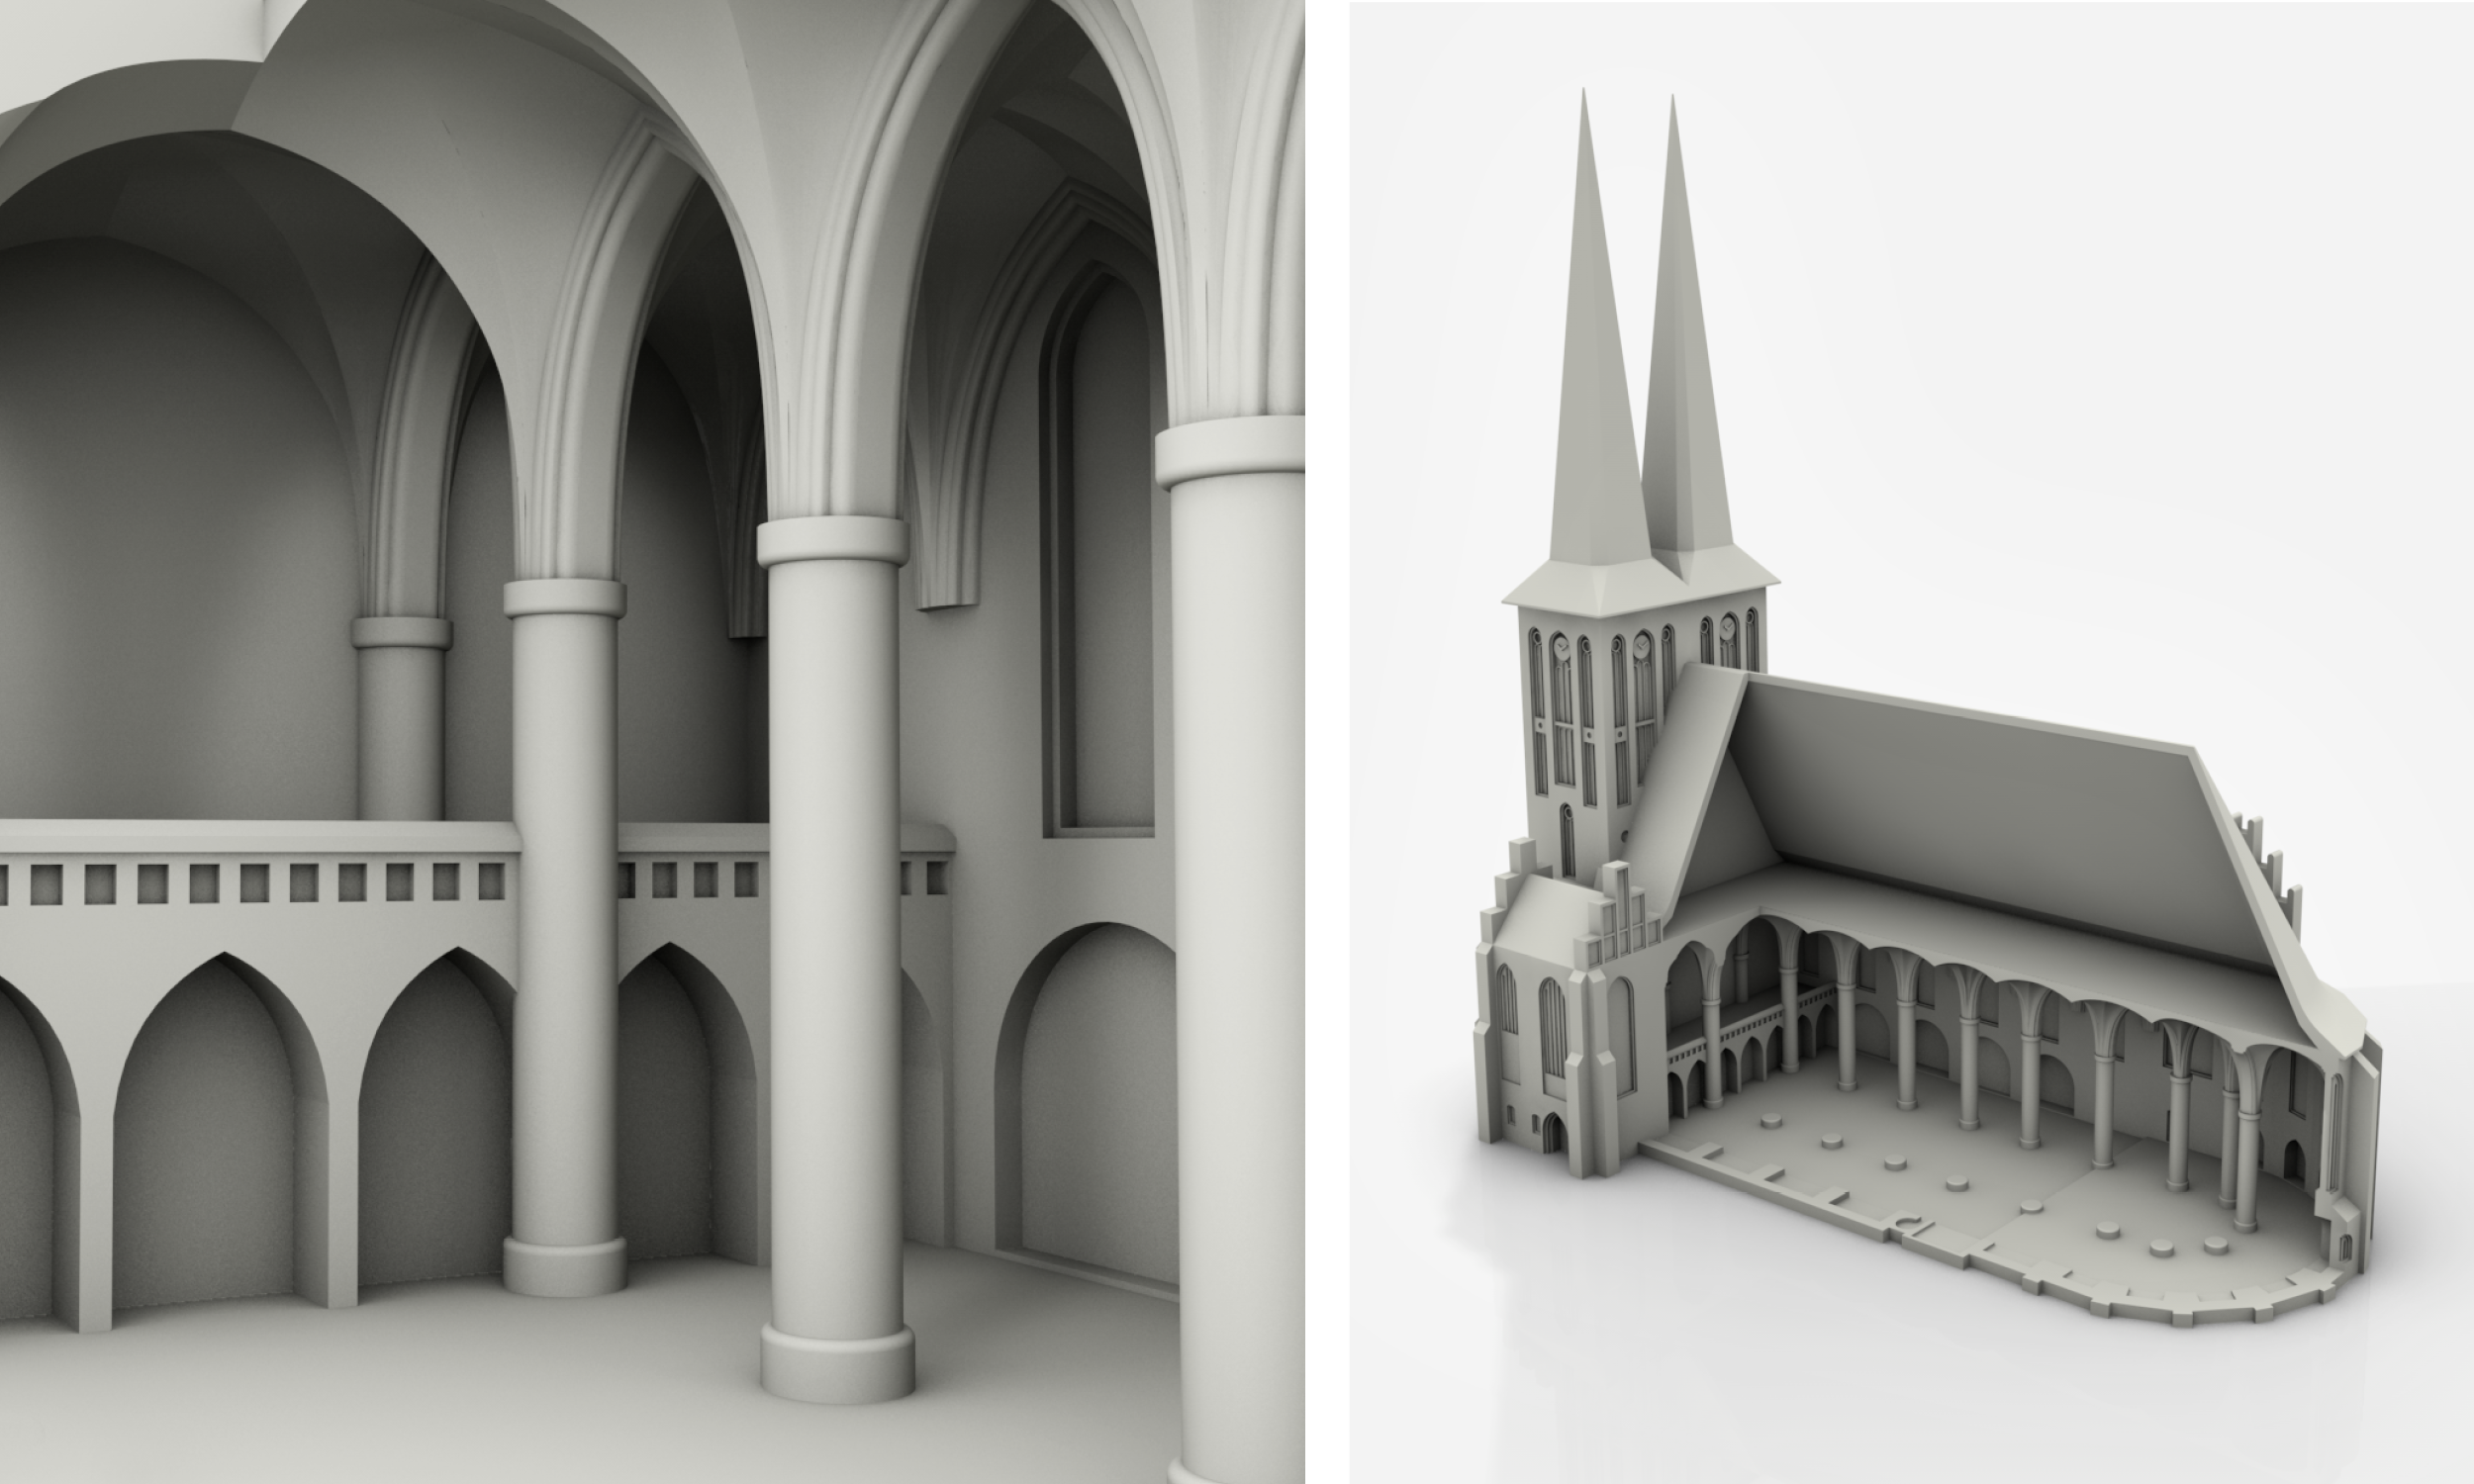 Left: This graphic shows the interior of the Nikolaikirche with the organ gallery, four pillars and the vault. Right: This graphic shows the complete model with the cut open interior of the Nikolaikirche.